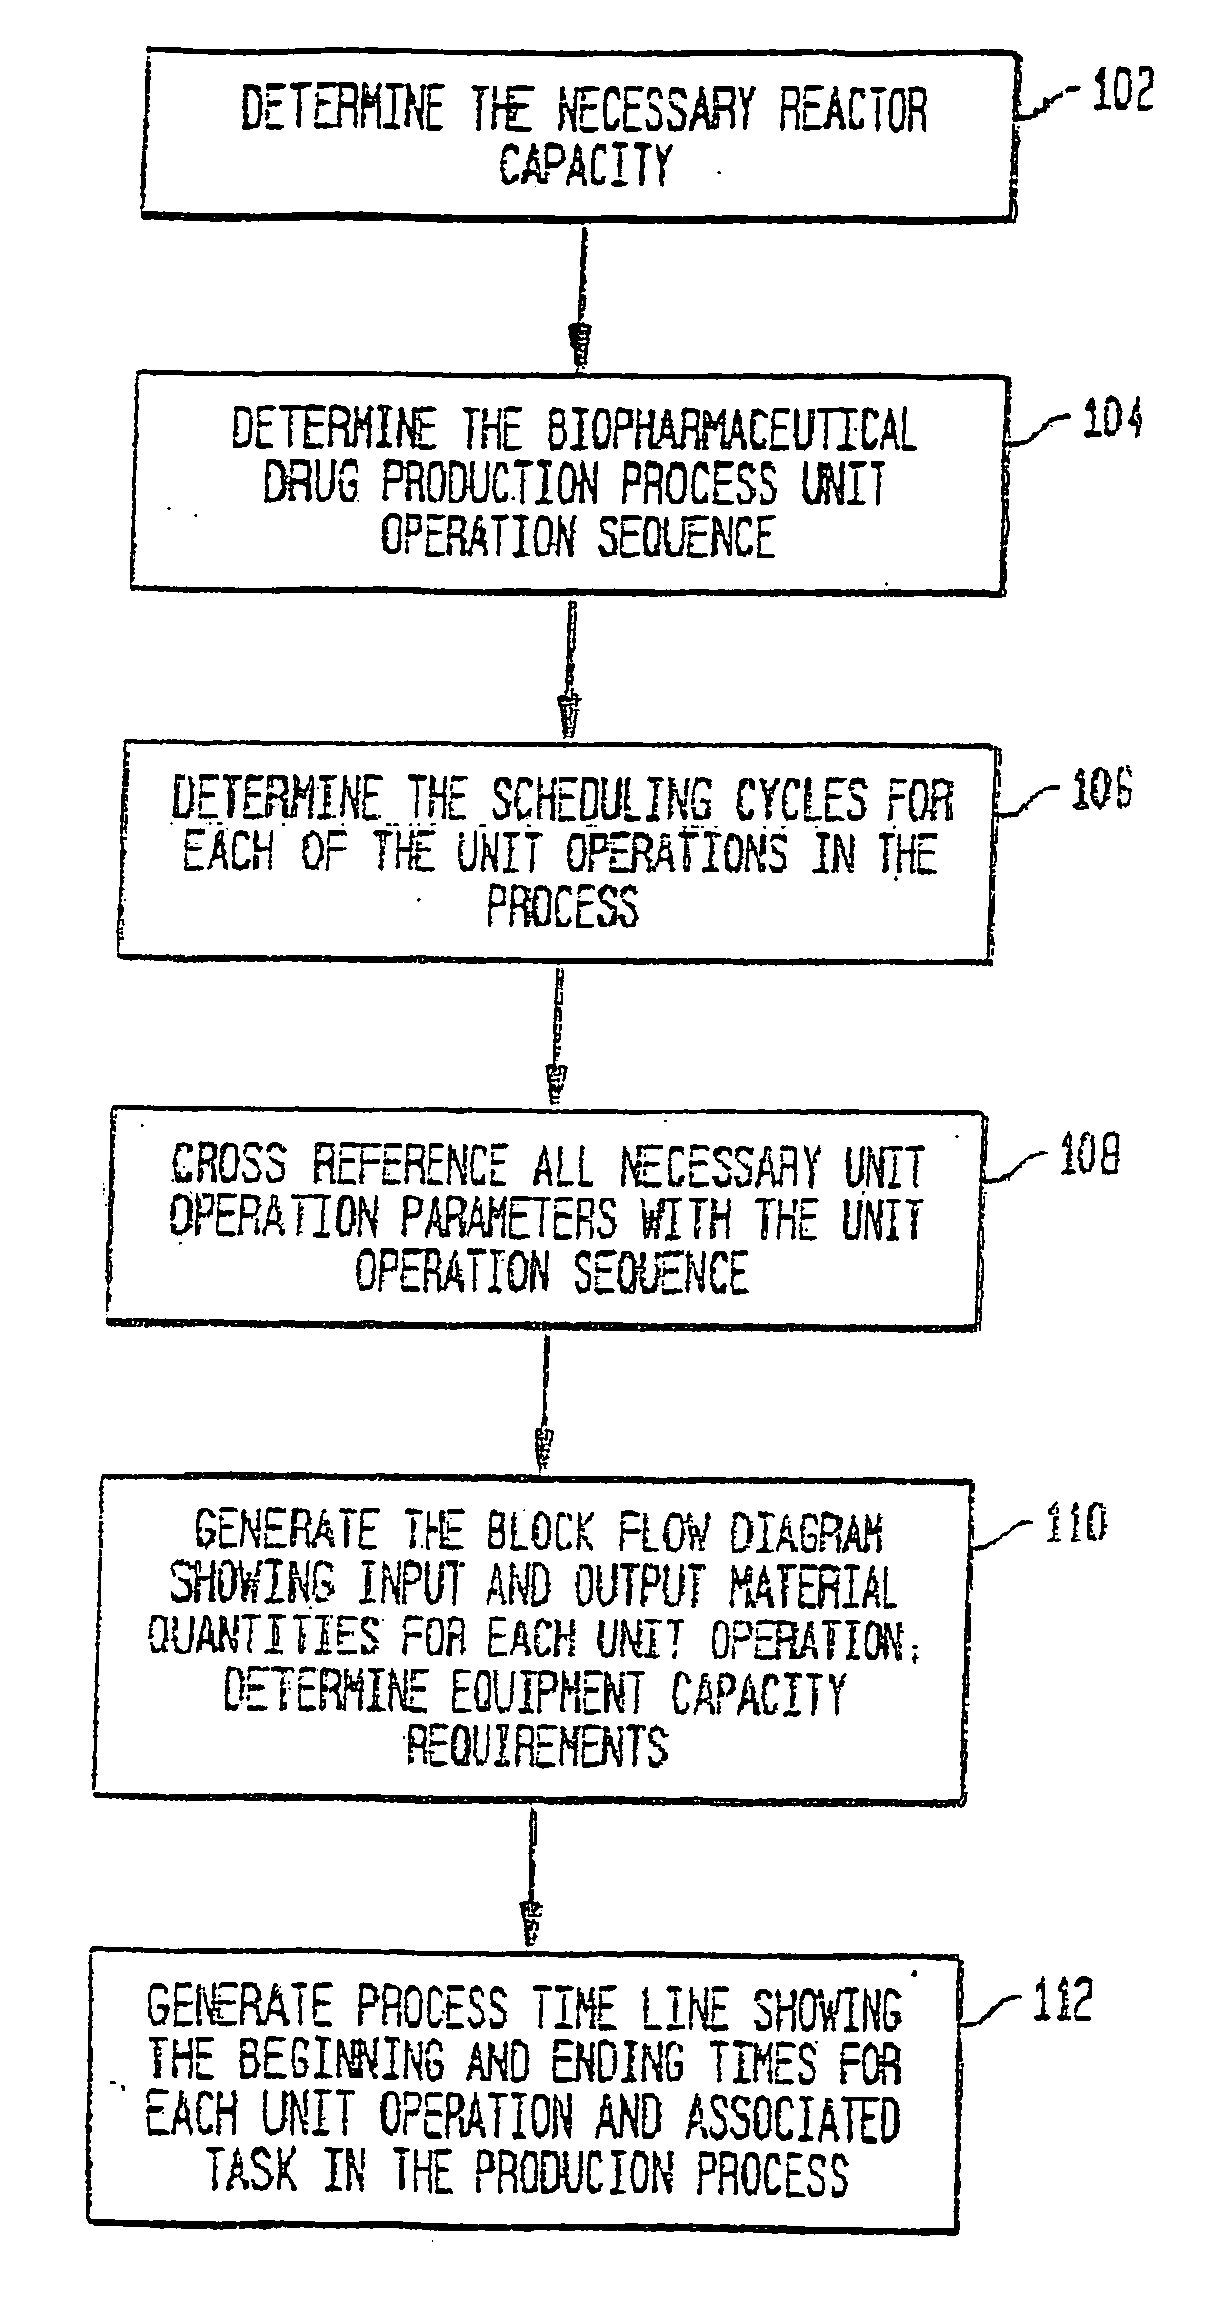 Method and system for simulating and modeling a batch manufacturing facility